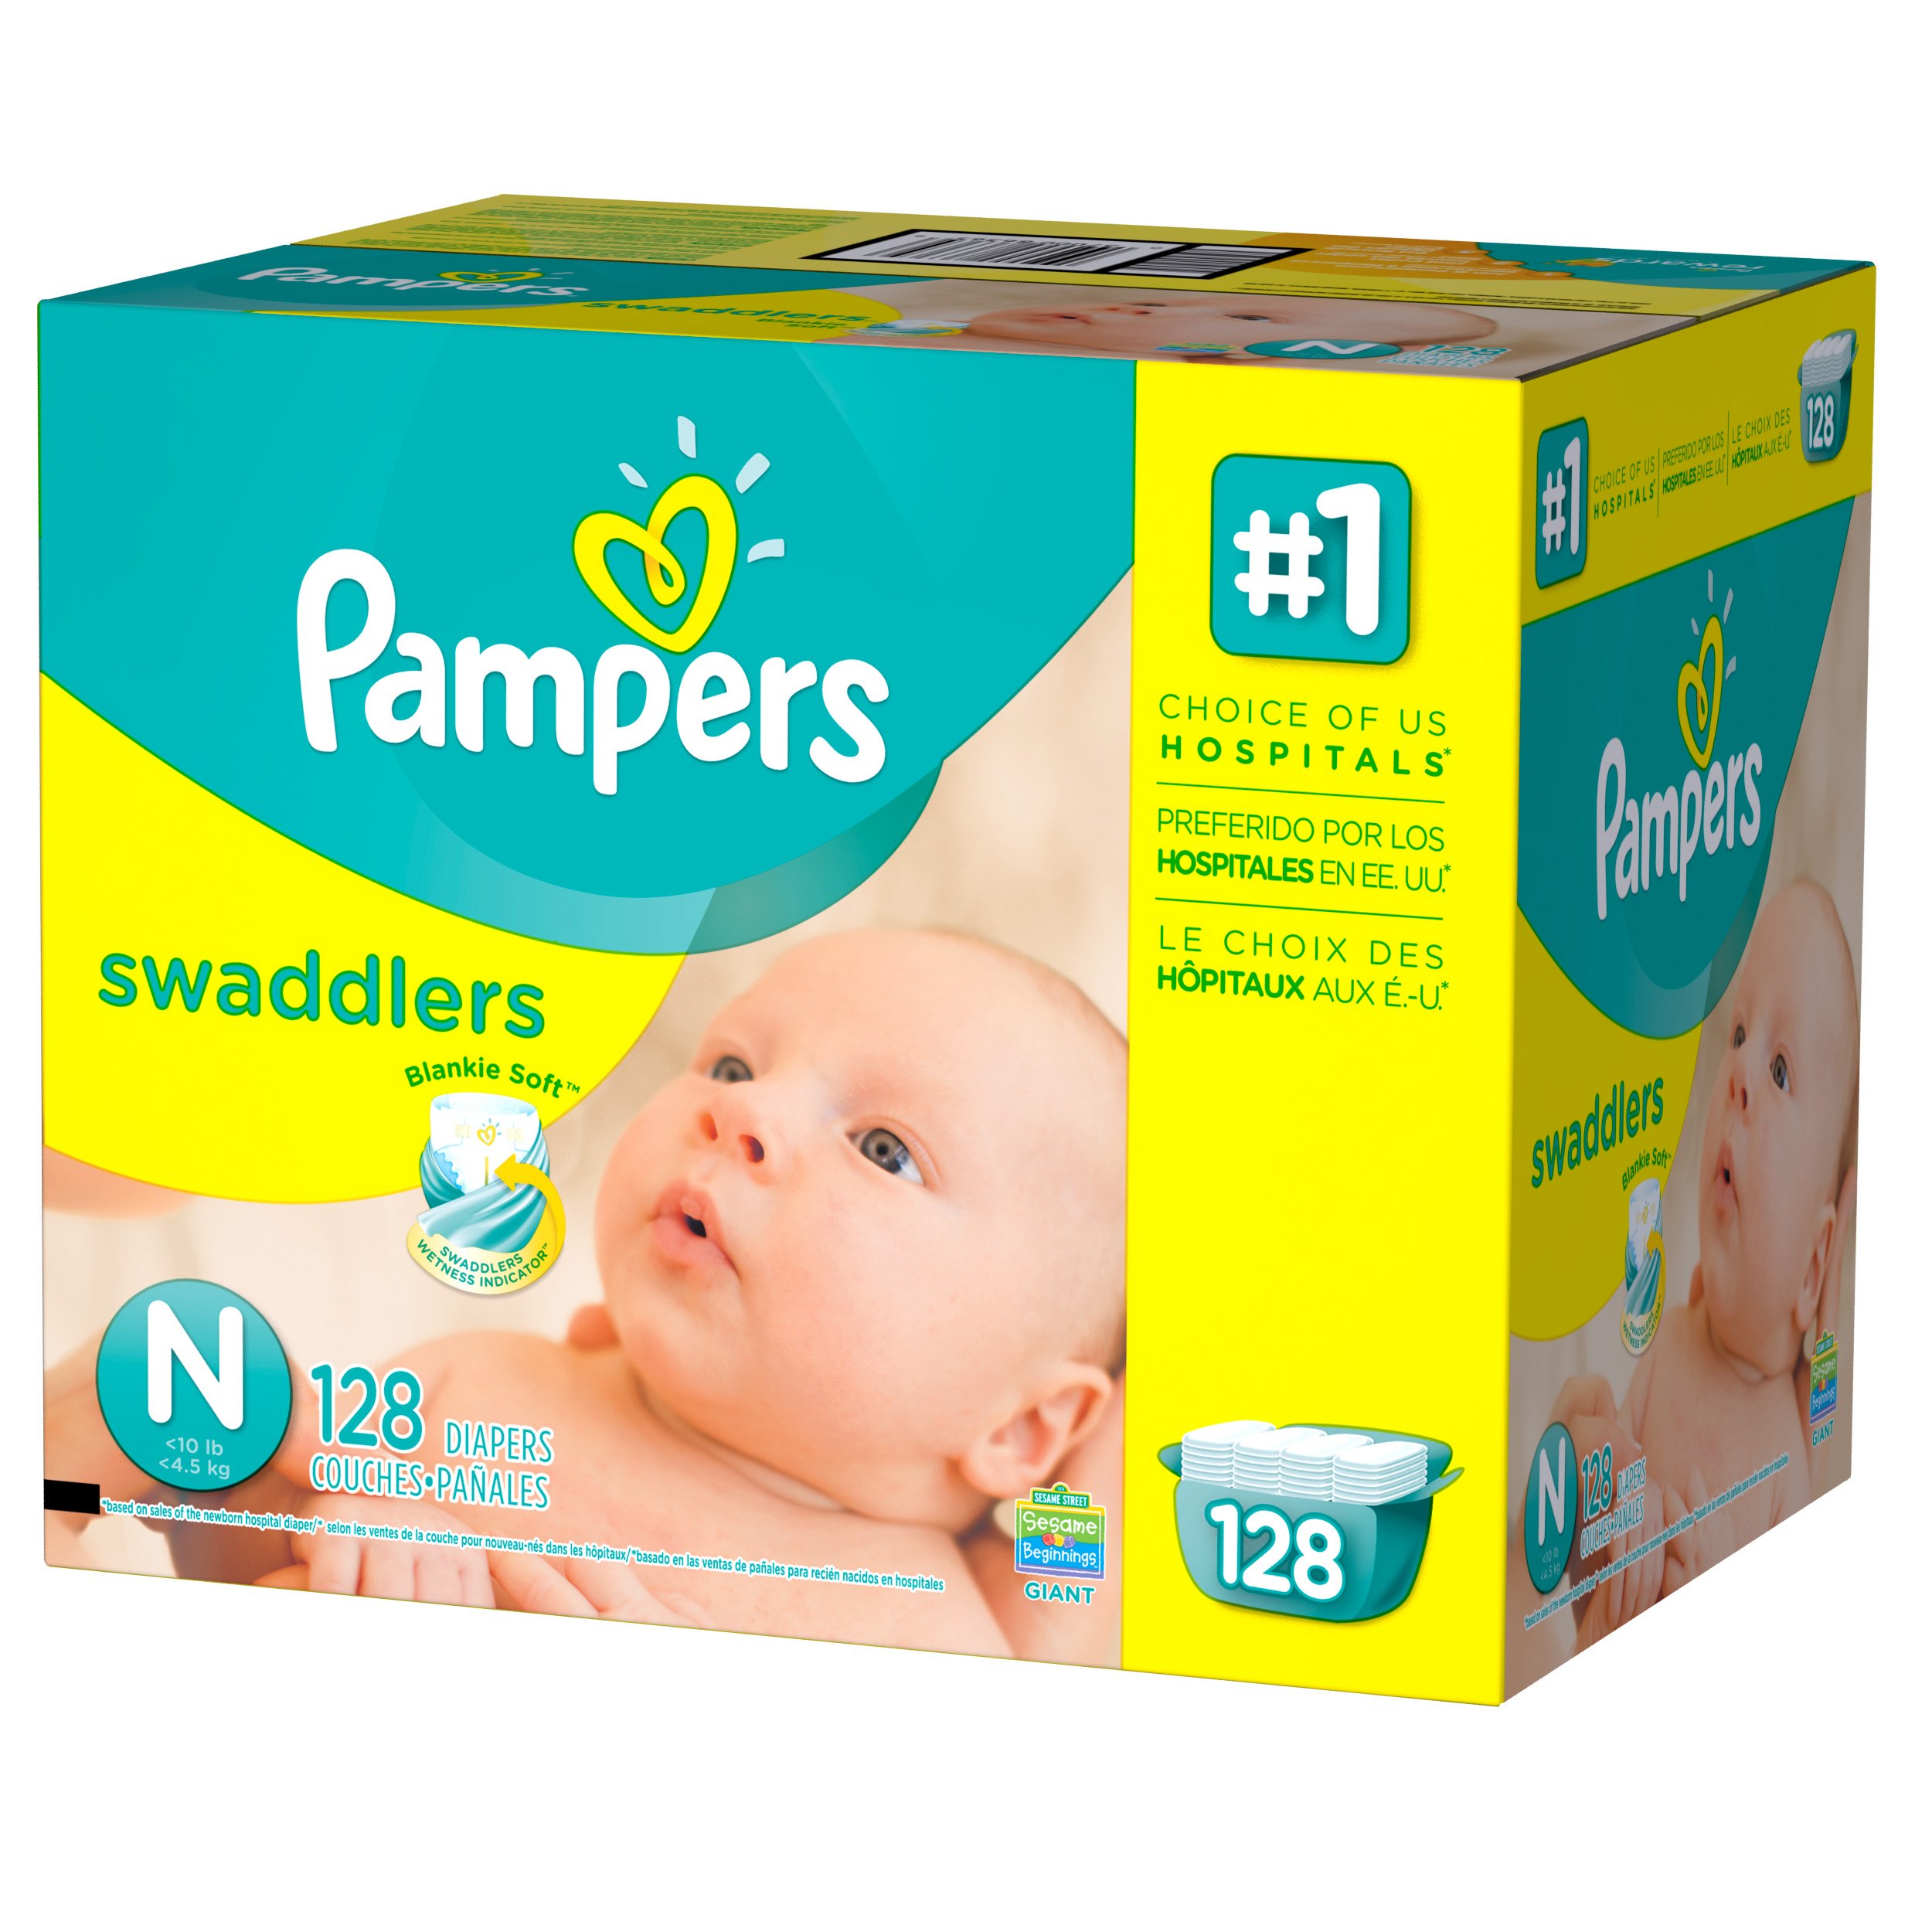 Pampers Swaddlers Newborn Diapers Size 0 128 count ...